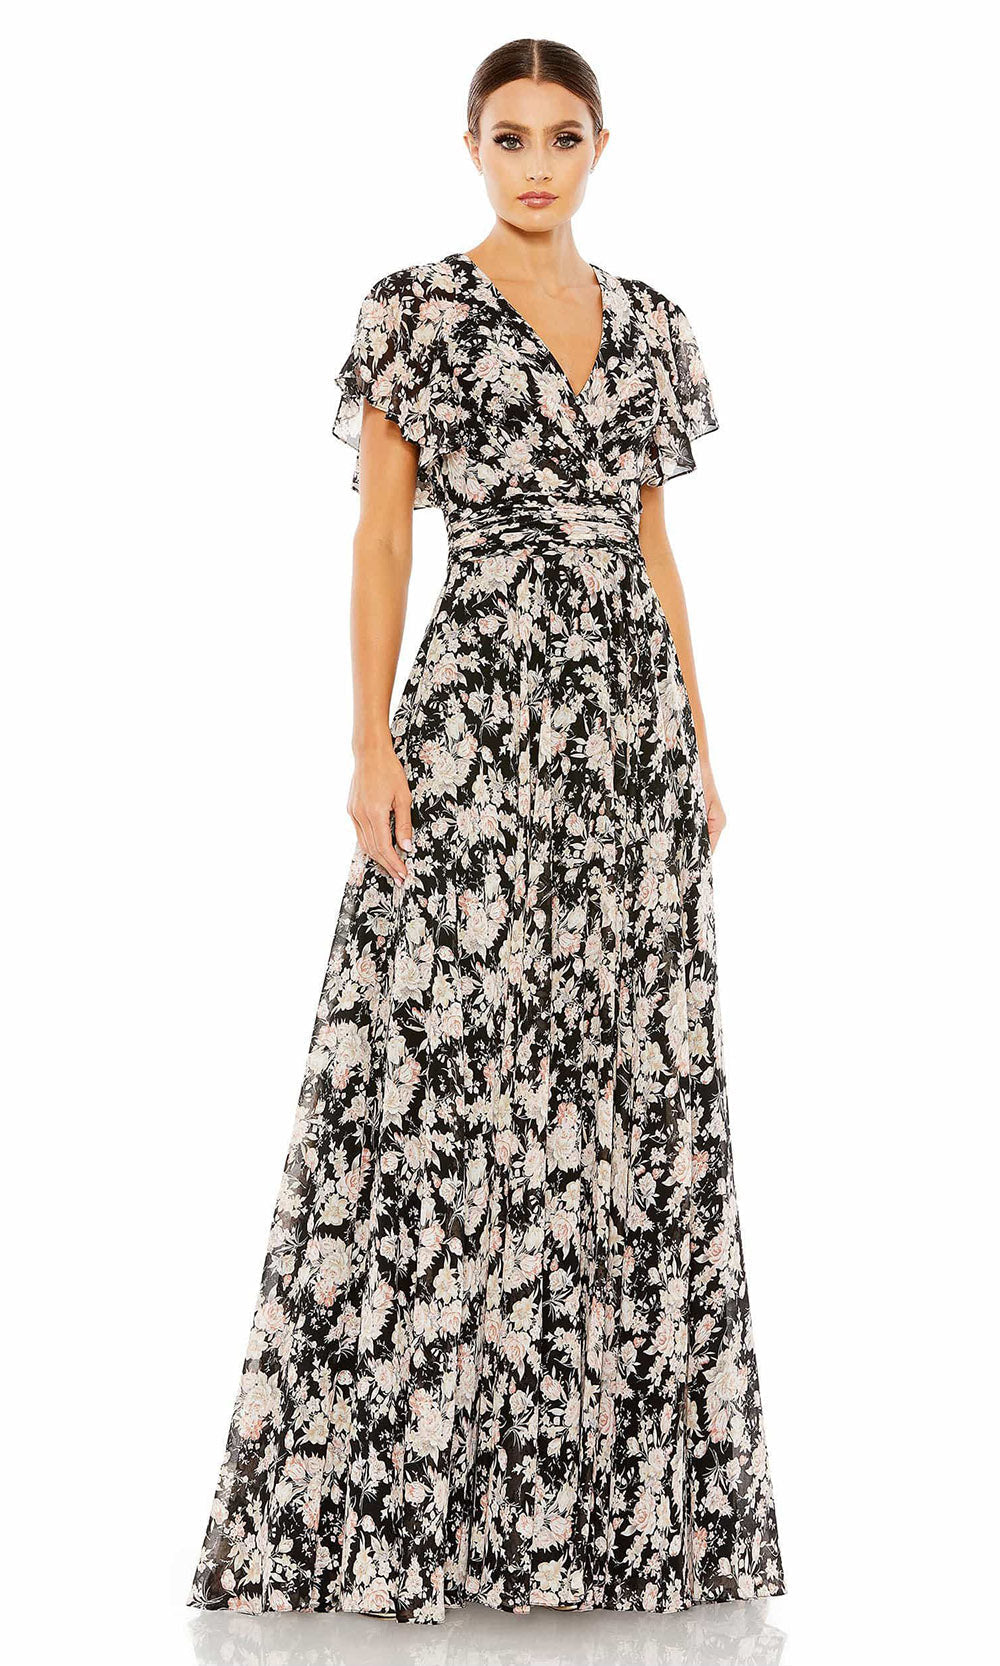 Mac Duggal - 11266 Floral Printed V Neck A-Line Gown In Black and White